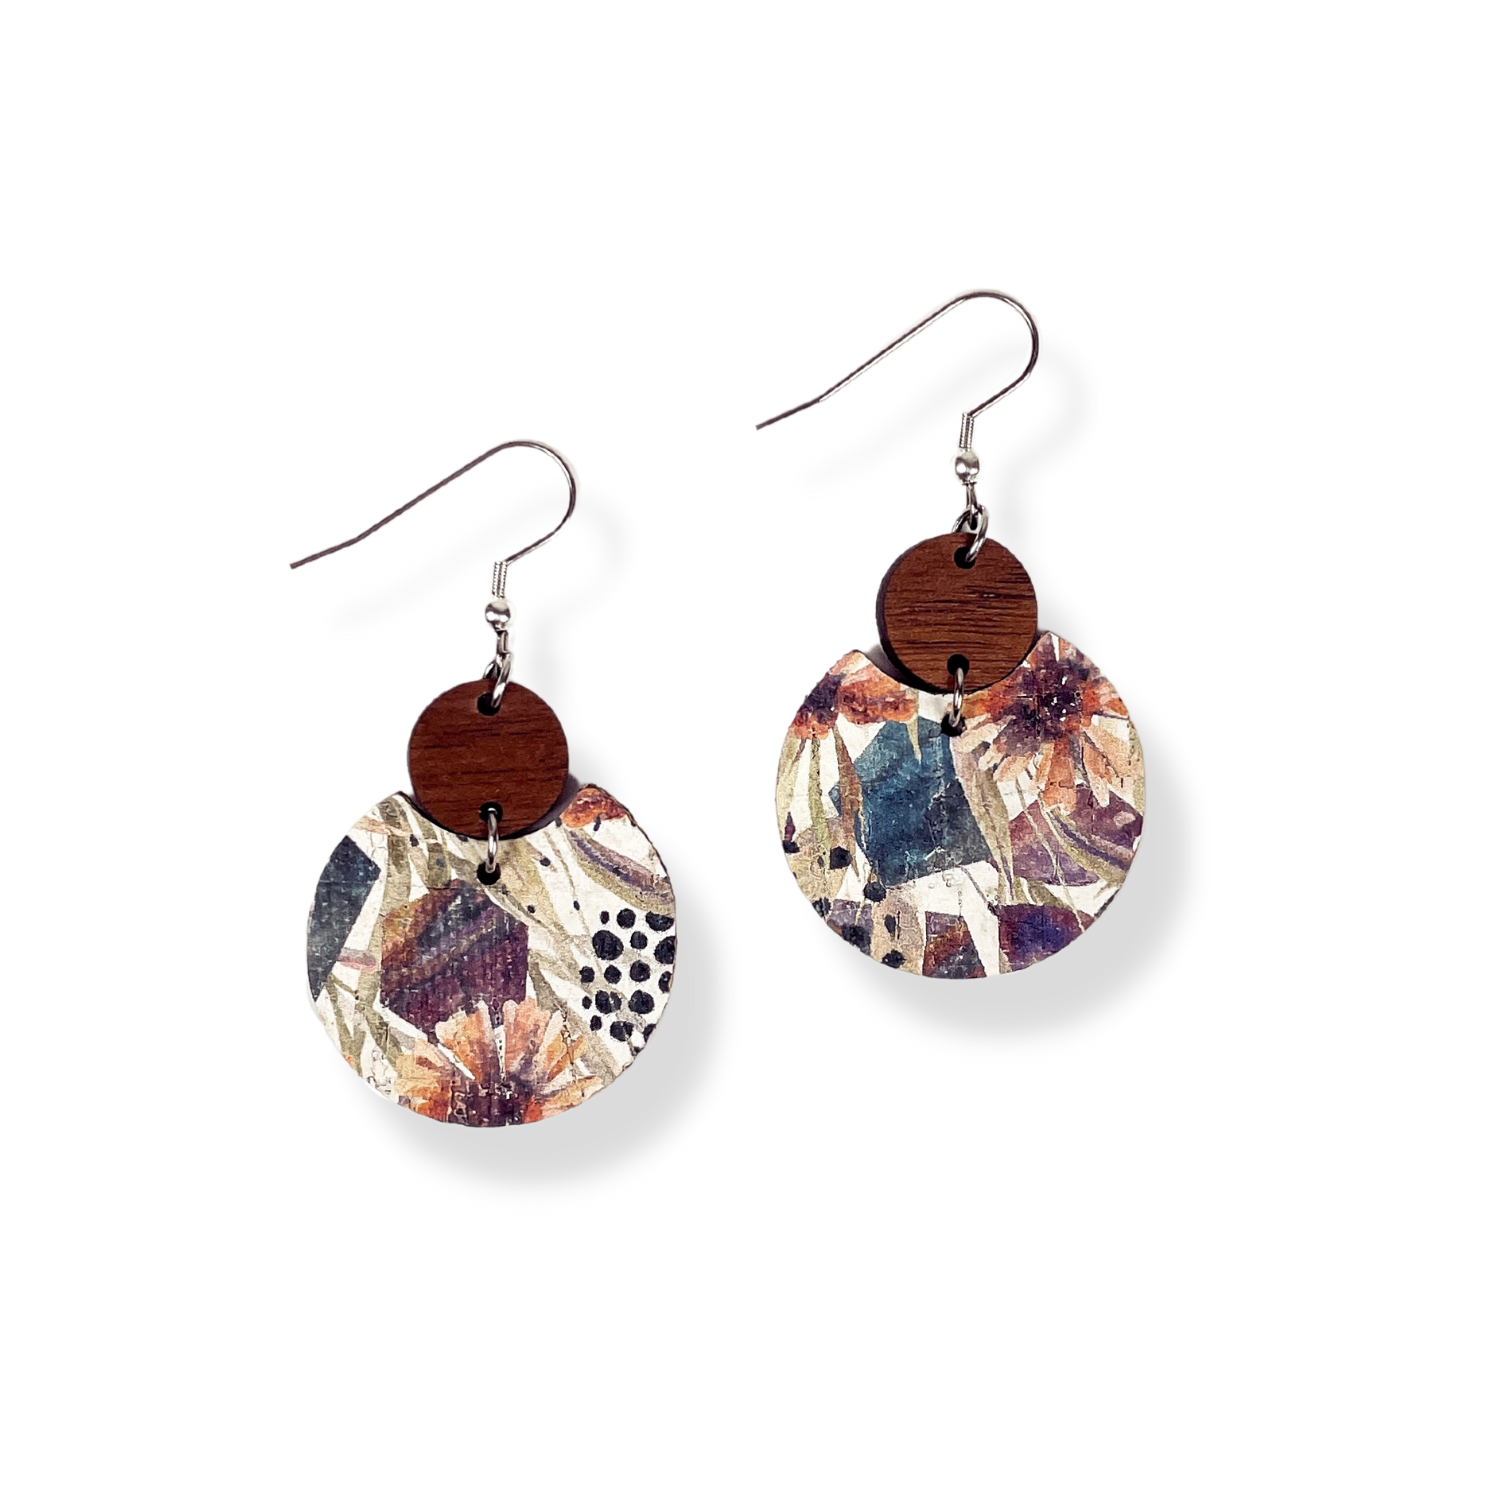 Cora Walnut Wood and Cork Earrings- Autumn Floral at